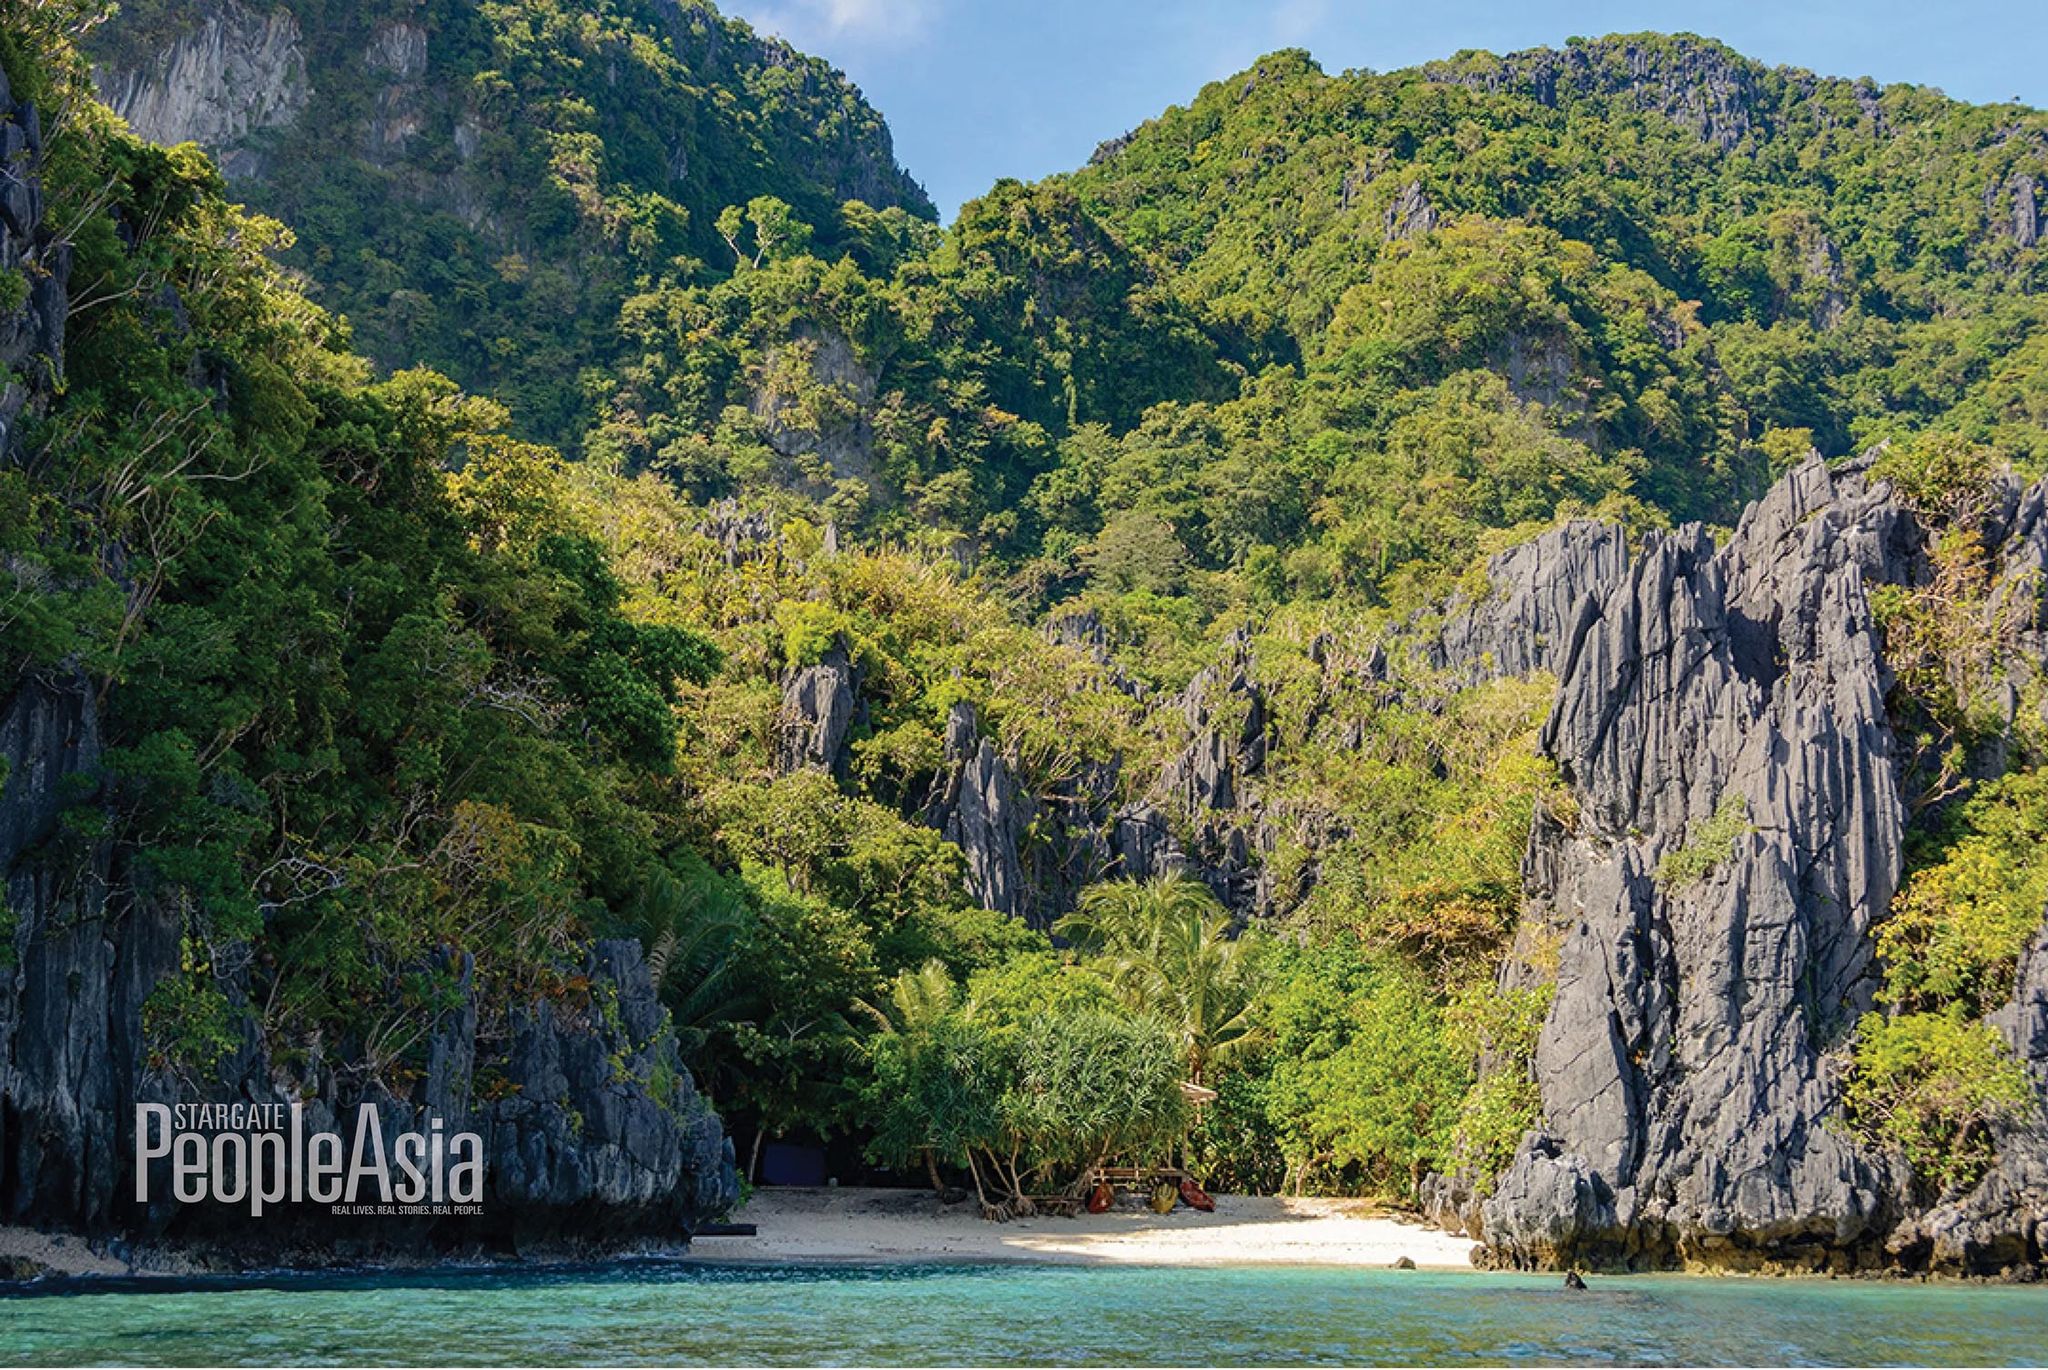 Palawan’s “Hidden Beach” is one of the “world’s most beautiful” — Condé Nast